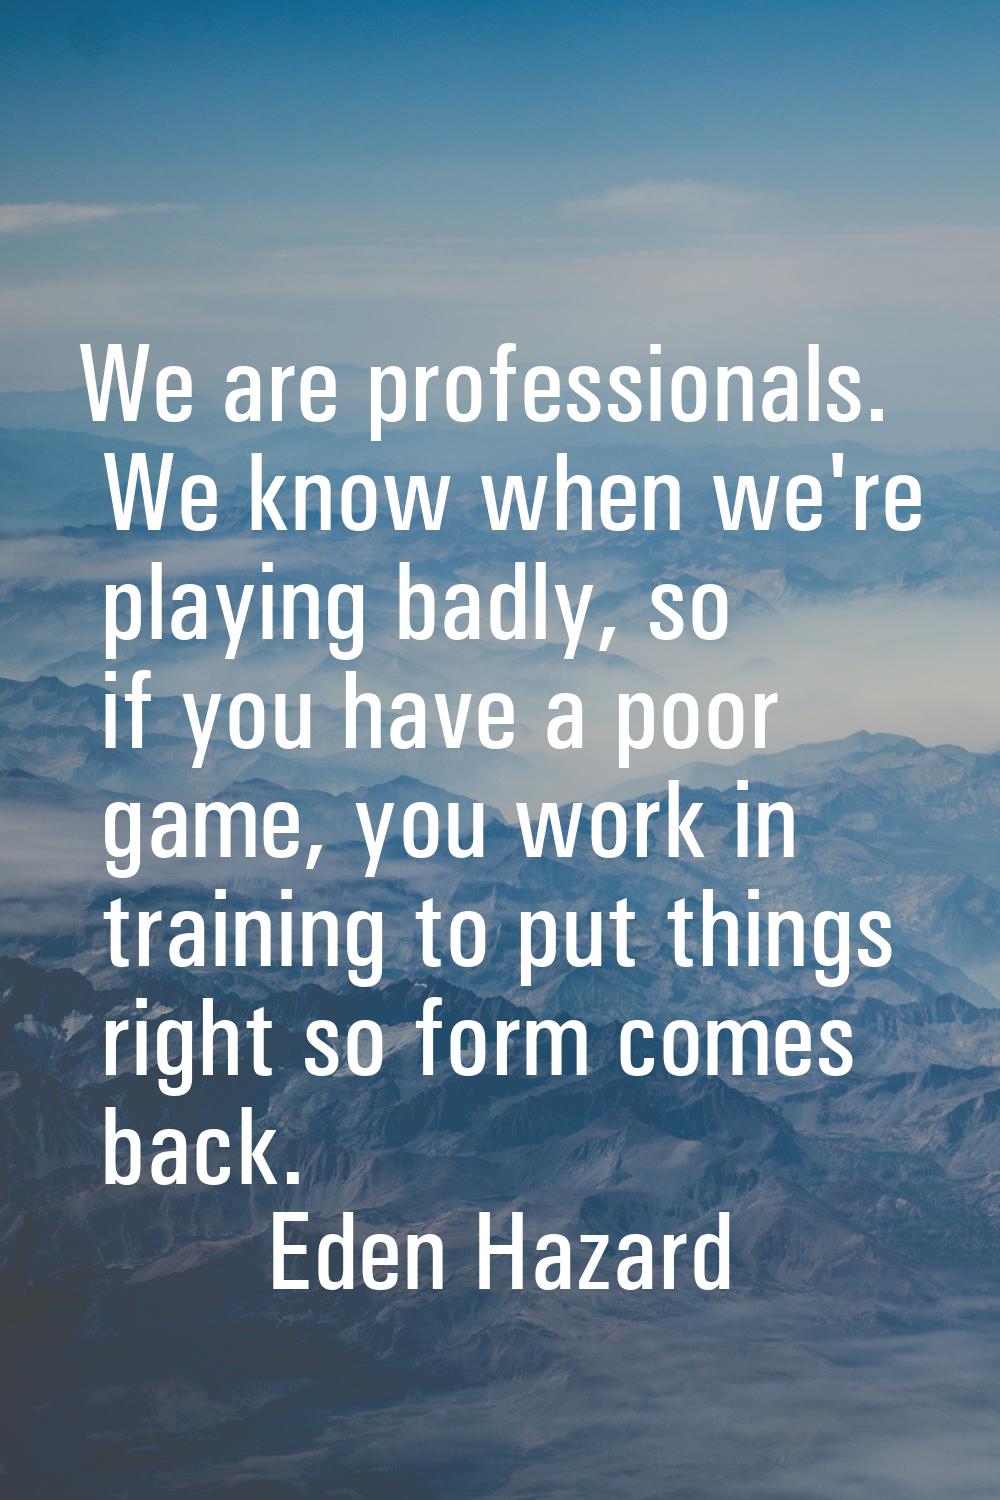 We are professionals. We know when we're playing badly, so if you have a poor game, you work in tra